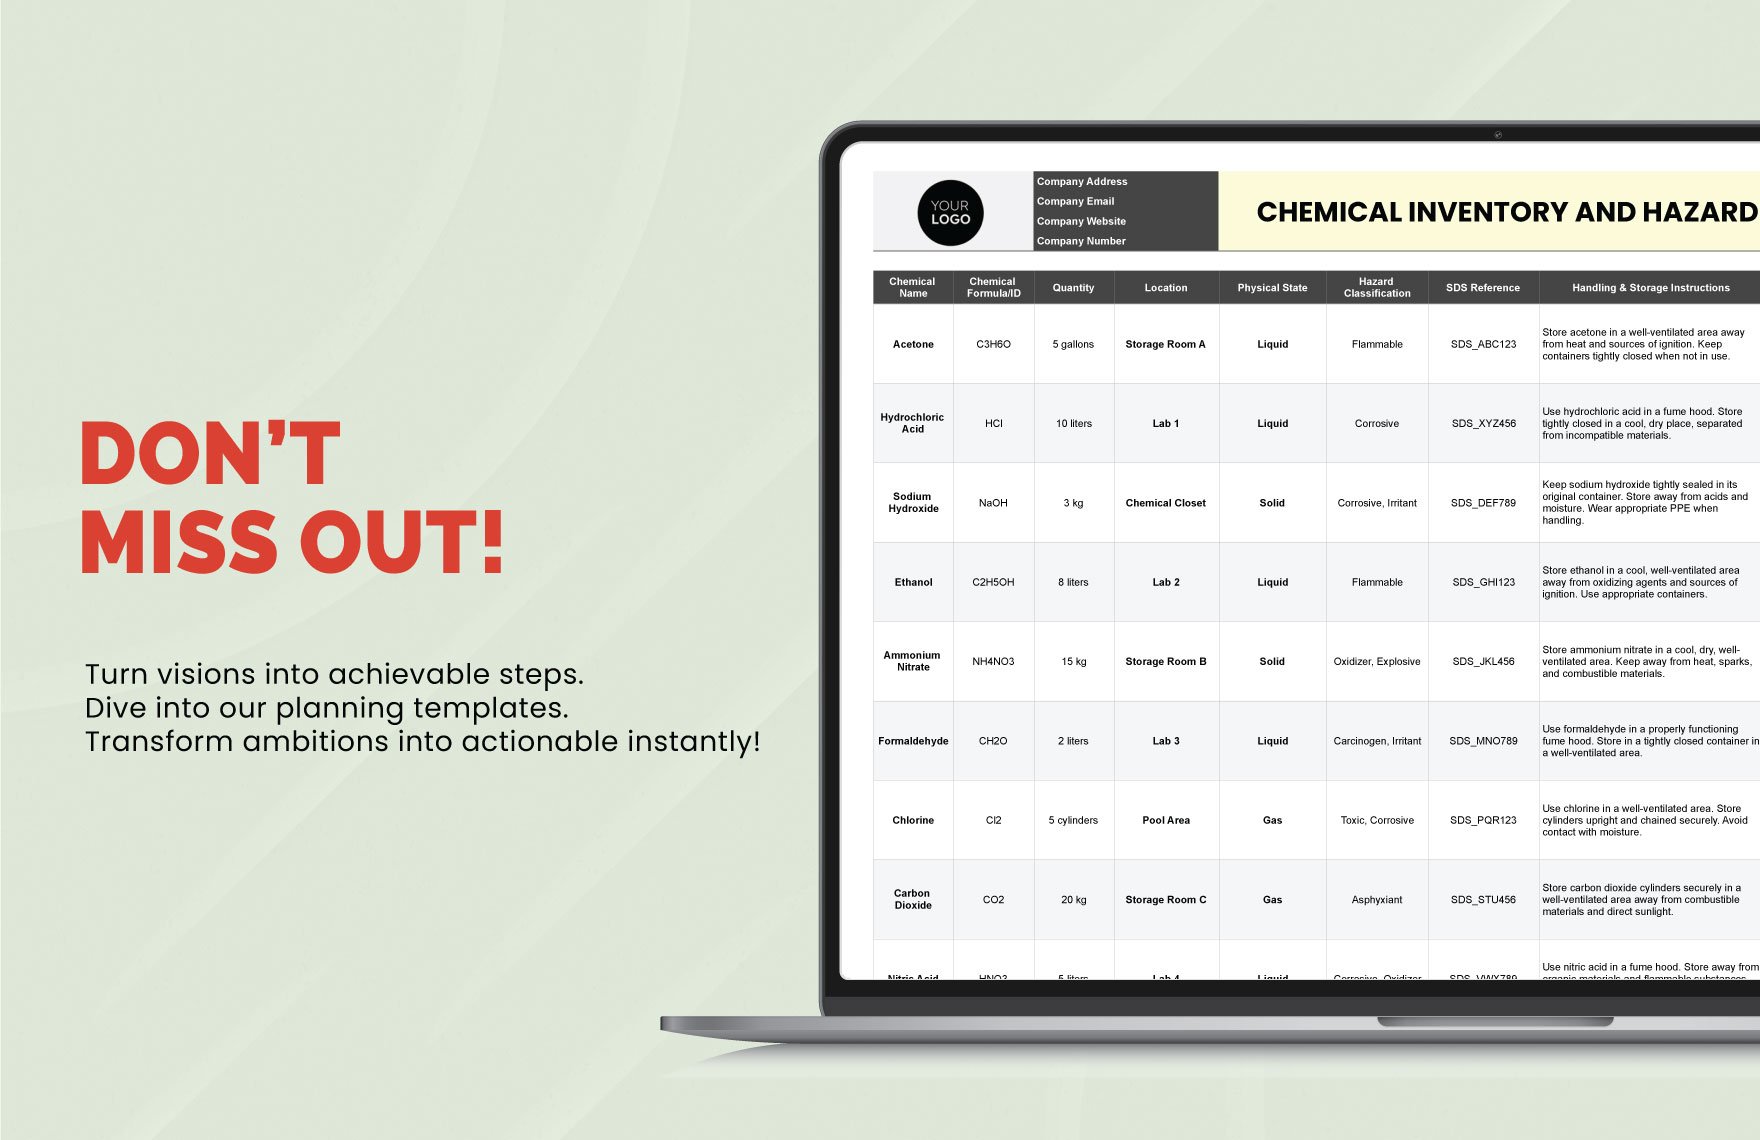 Chemical Inventory and Hazard Communication Tool HR Template